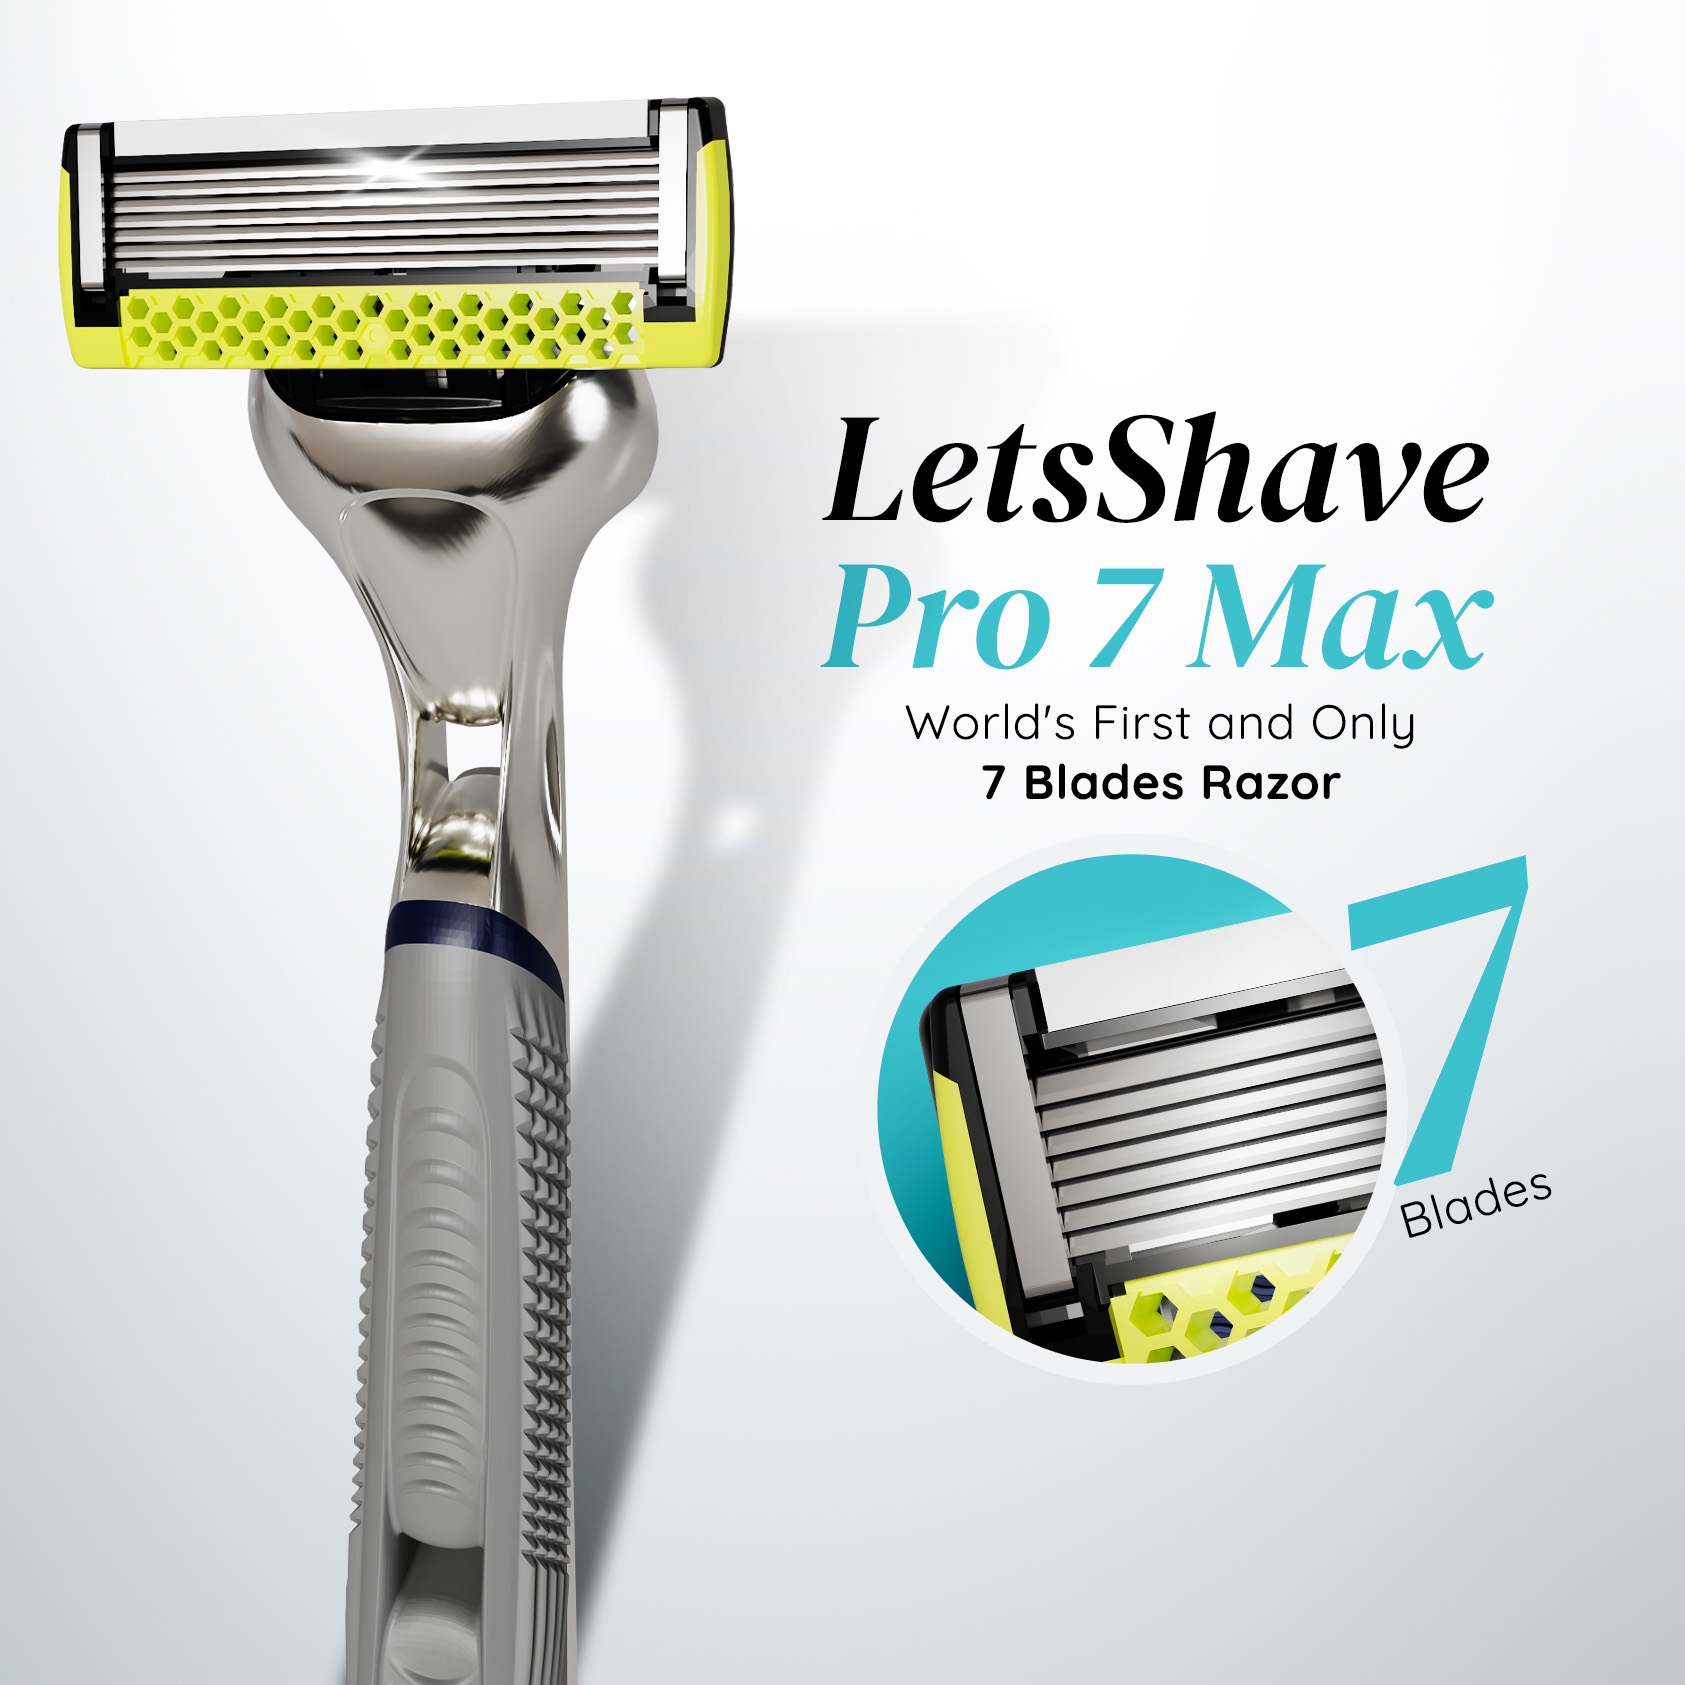 LetsShave Pro 7 Max Razor Value set for Men | World's First & Only 7-Blade Shaving Razor with Precision Blades & Honey Comb Guard Bar